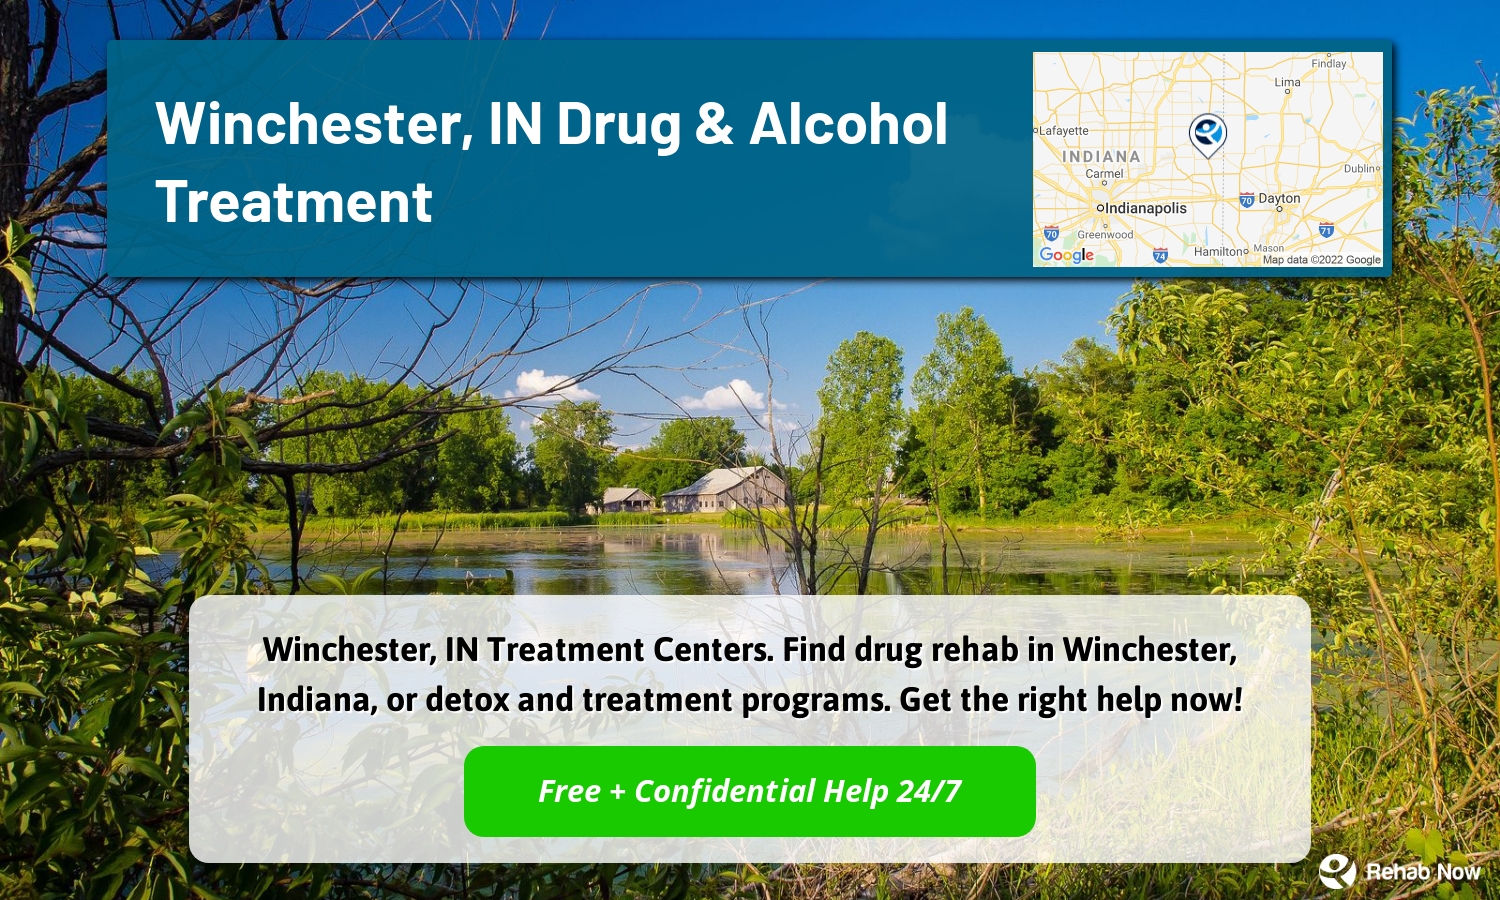 Winchester, IN Treatment Centers. Find drug rehab in Winchester, Indiana, or detox and treatment programs. Get the right help now!